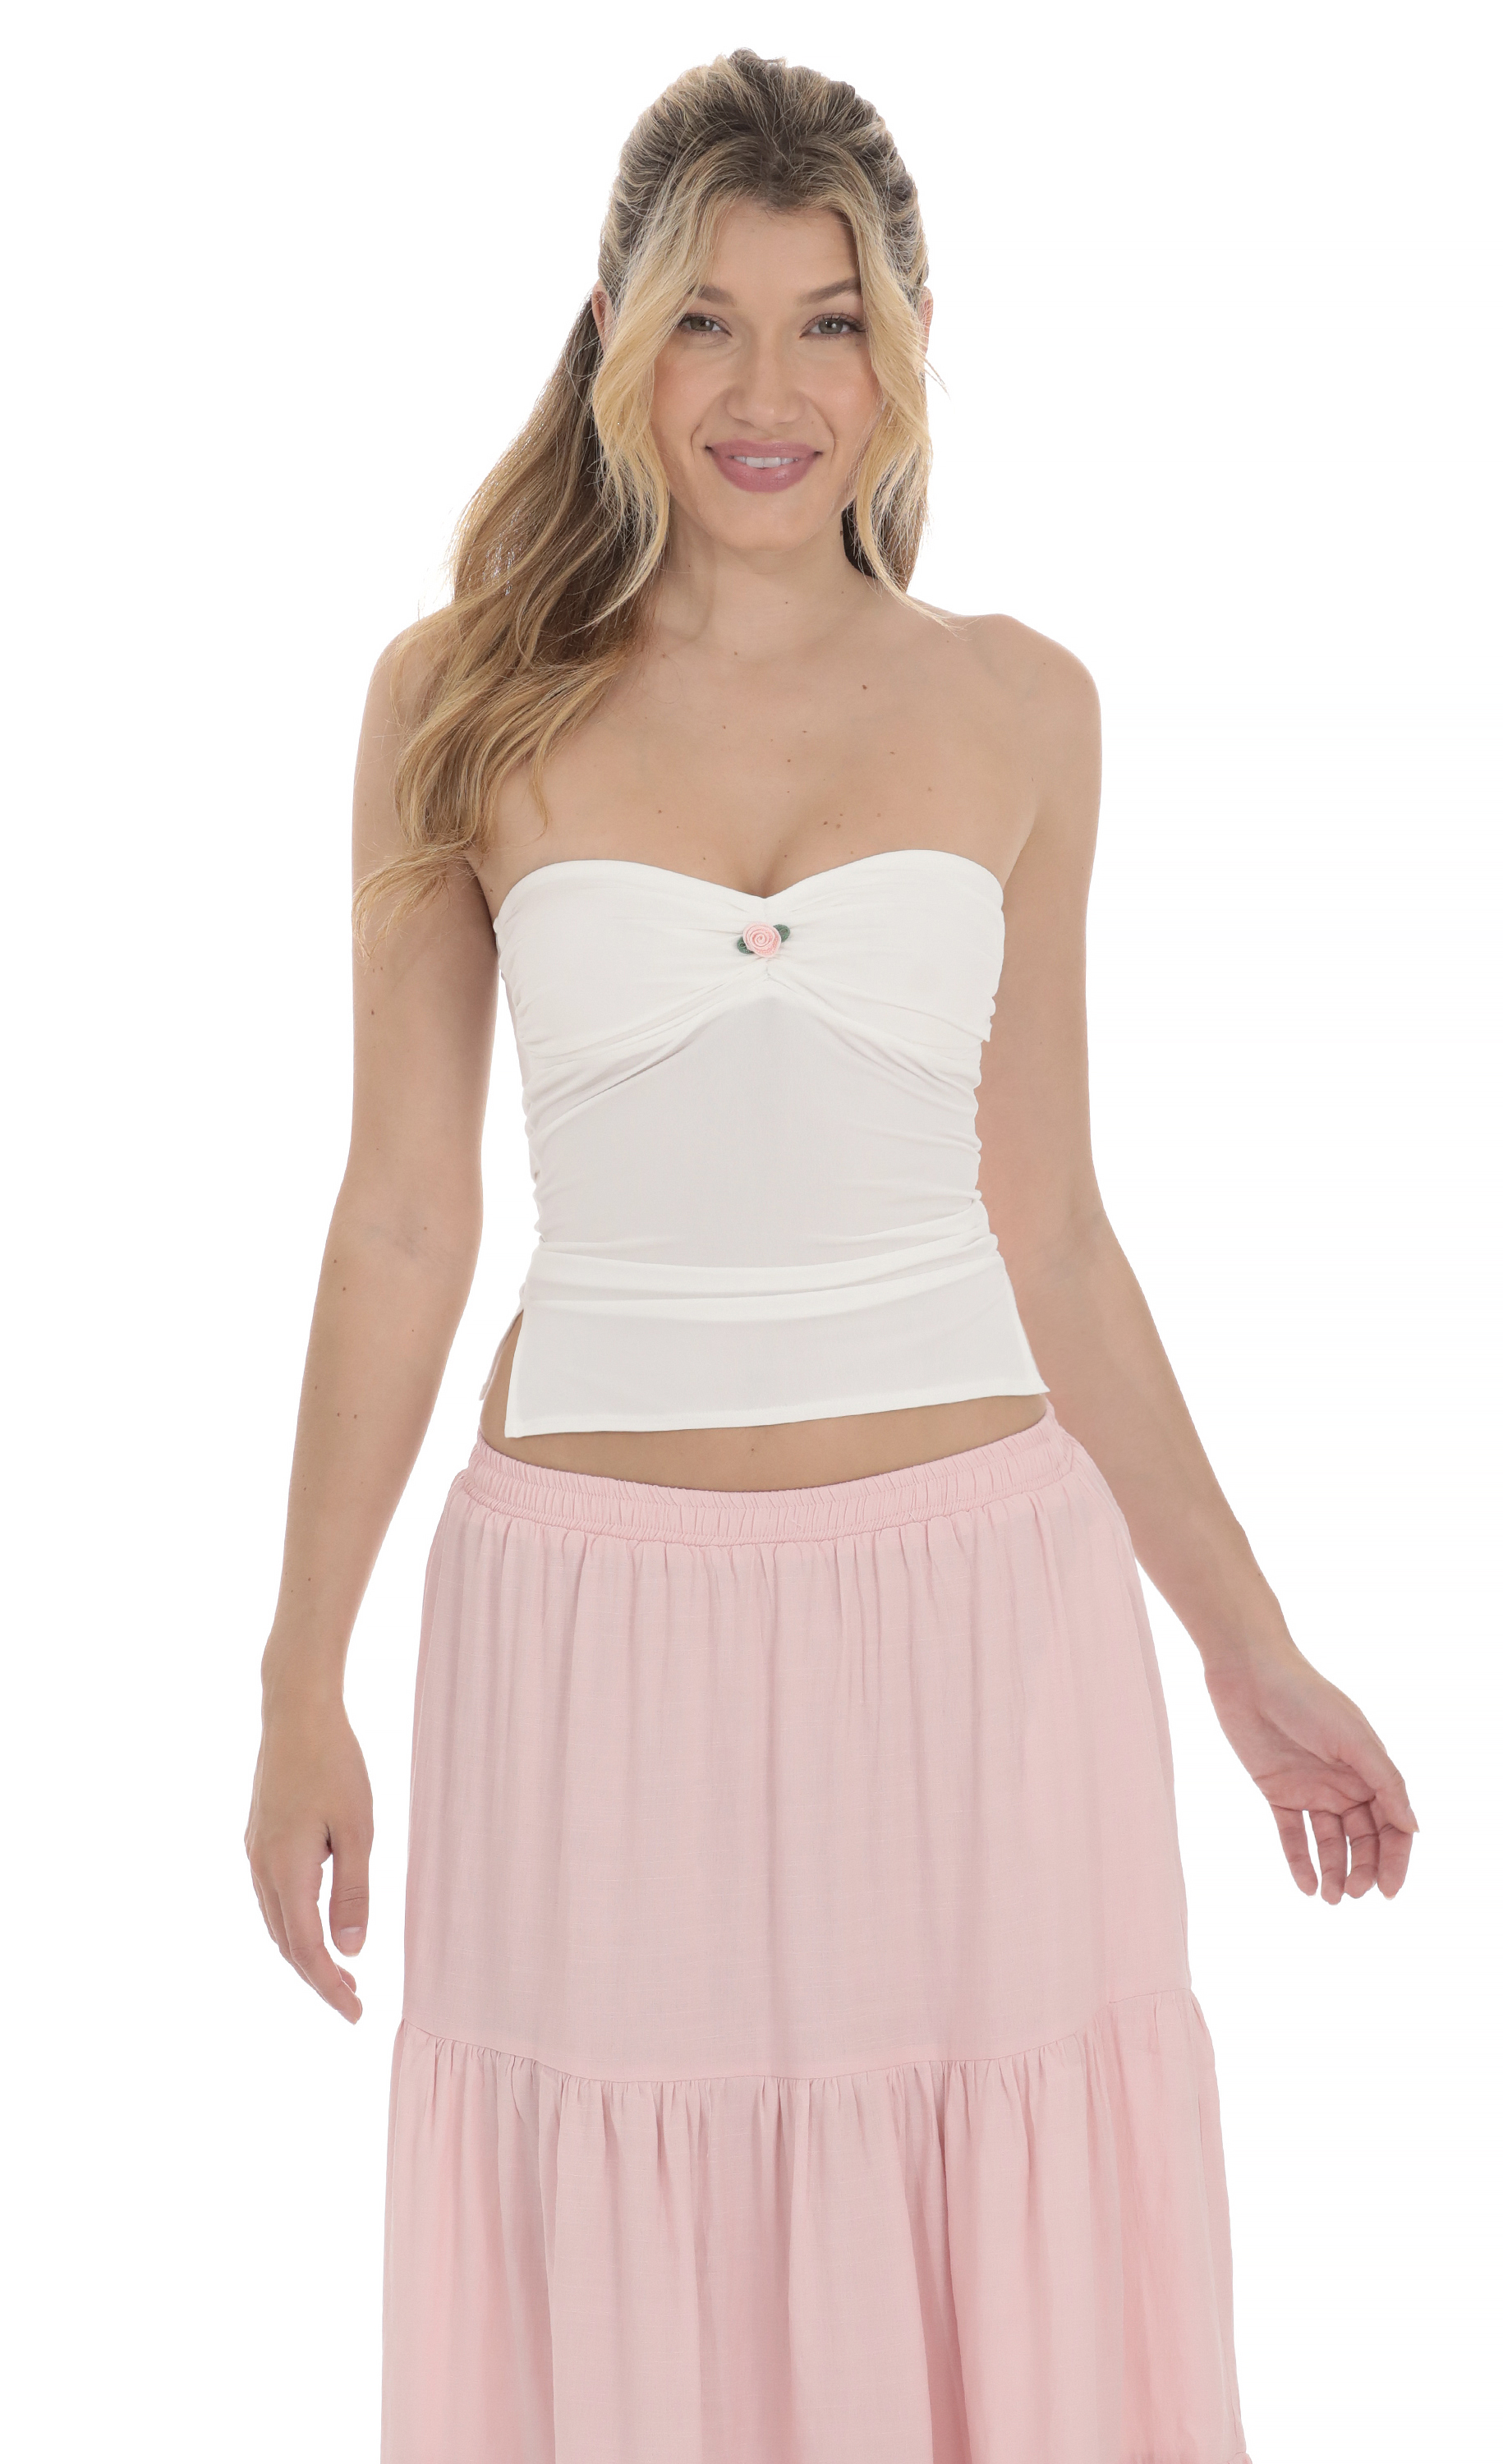 Strapless Slits Top in White